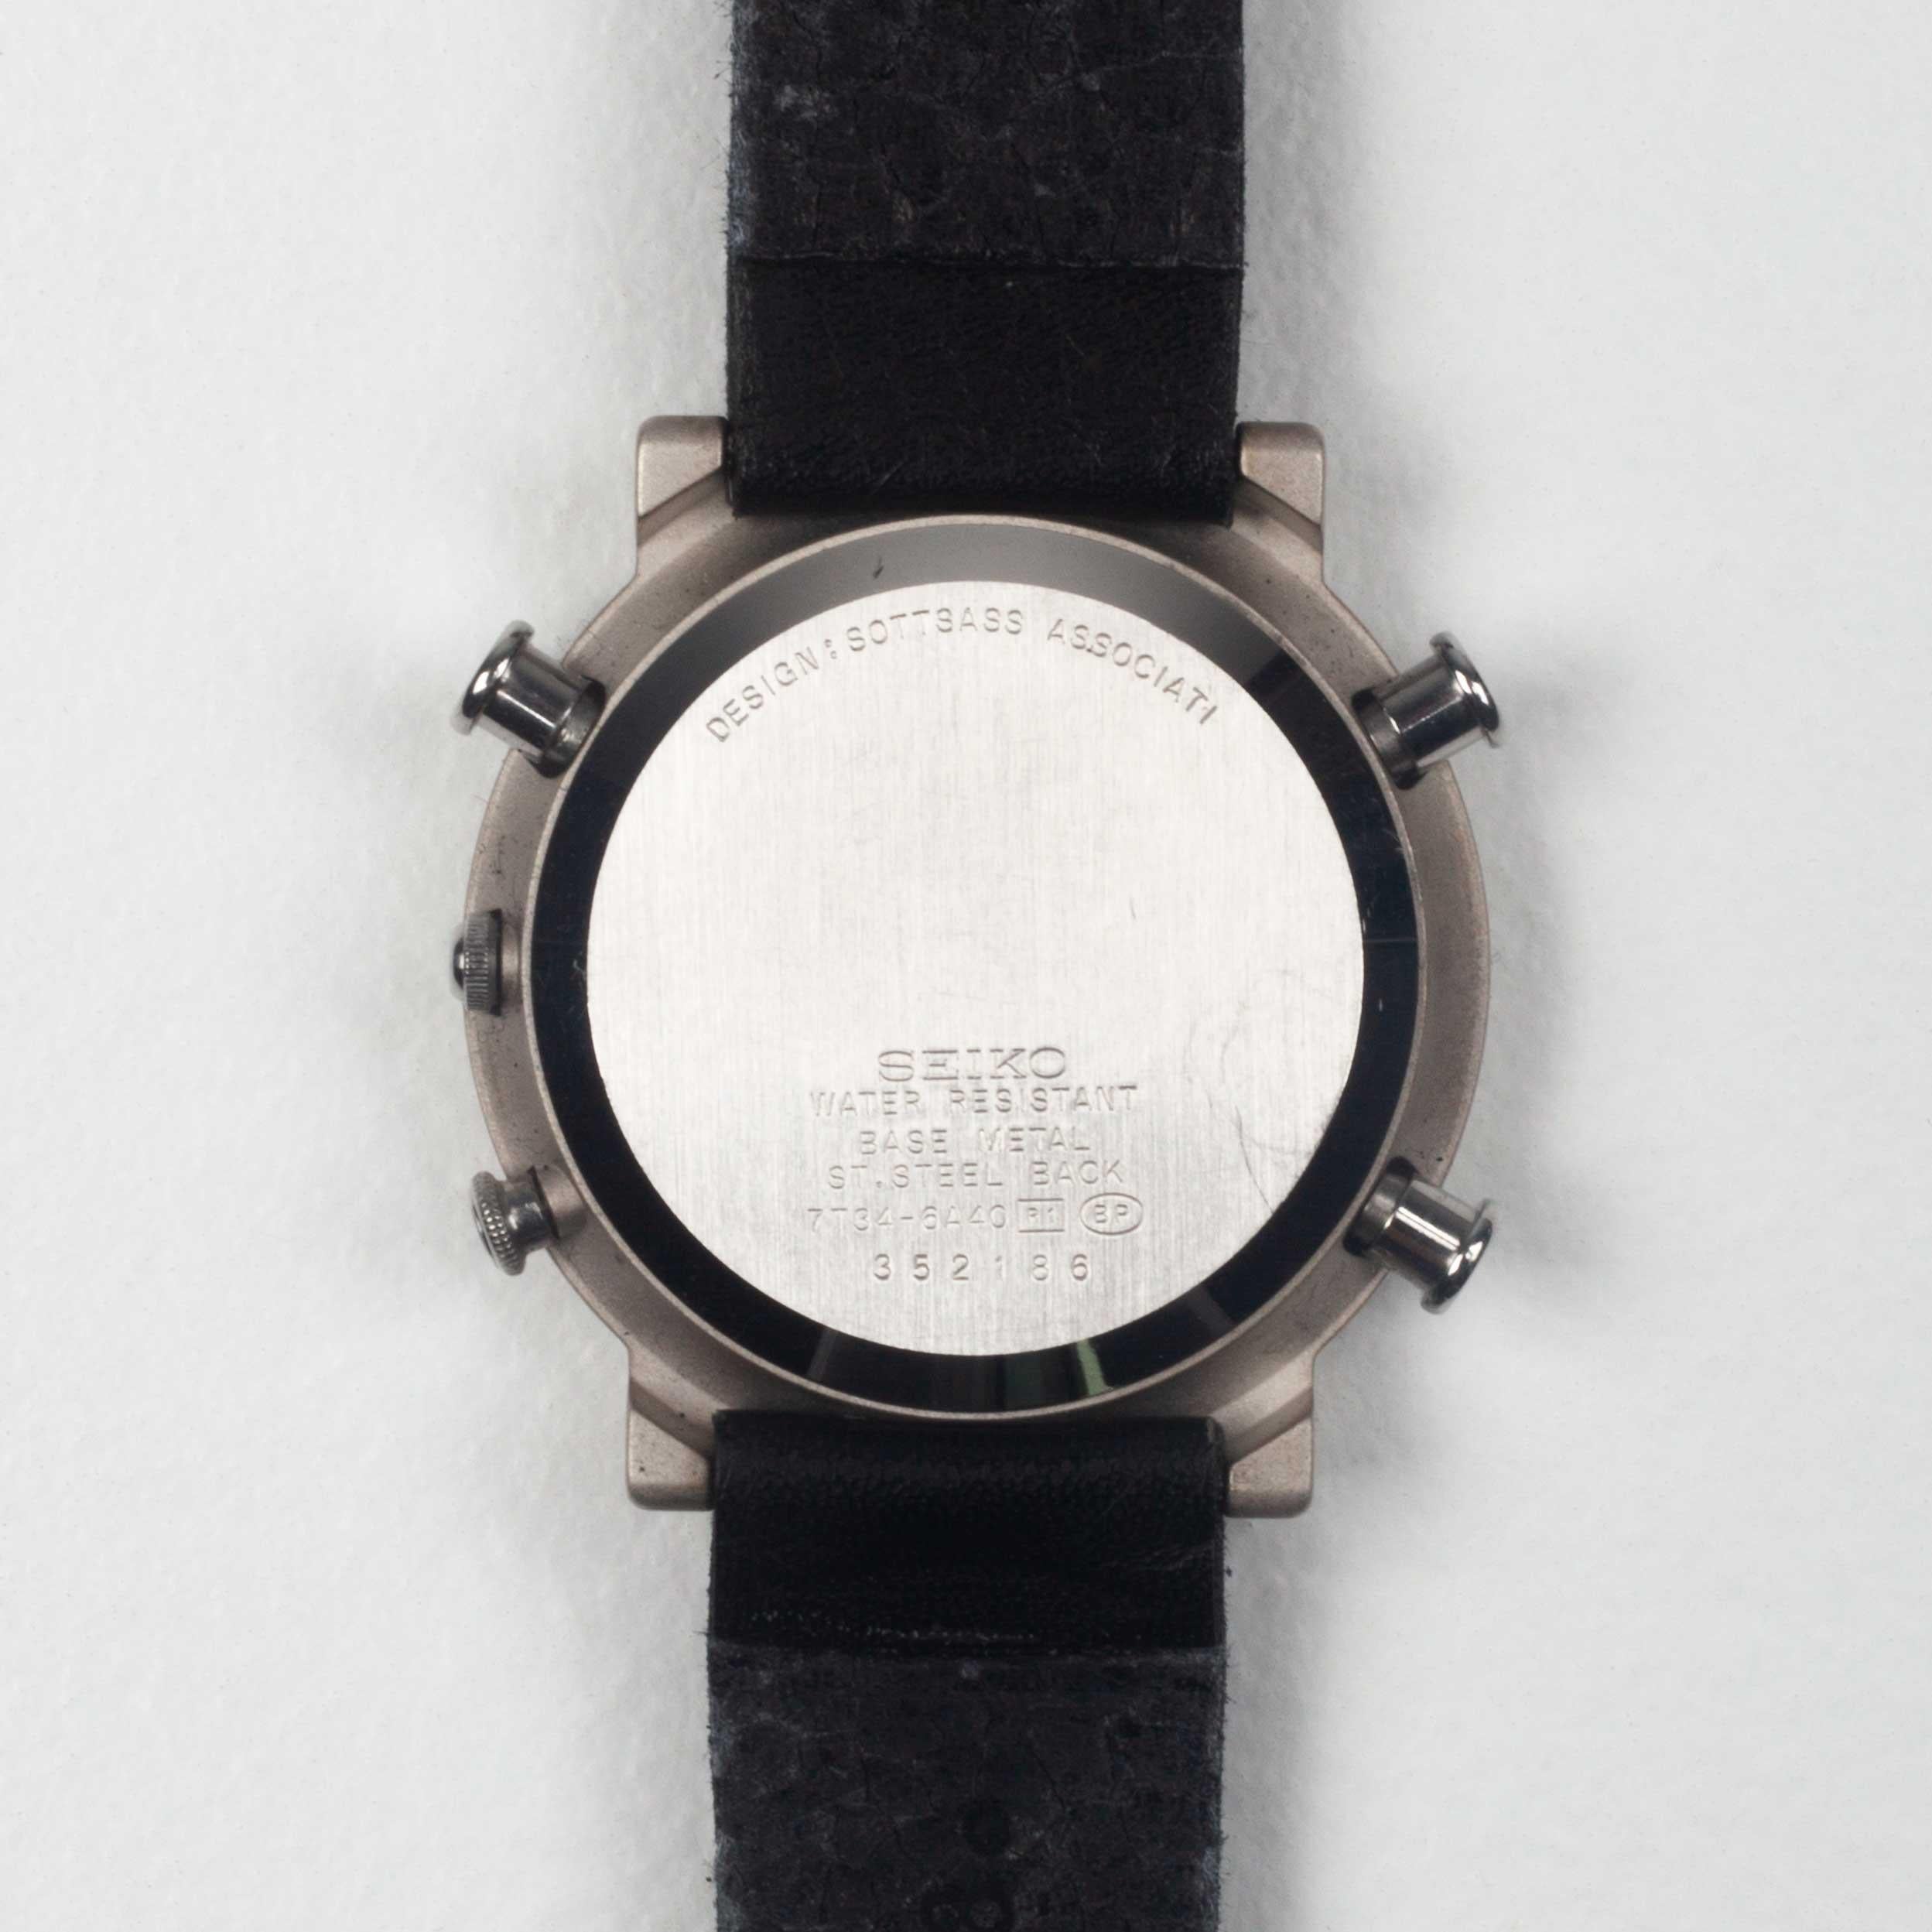 Japanese Ettore Sottsass Chronograph Watch, Collection Sottsass for Seiko, Japan, 1993